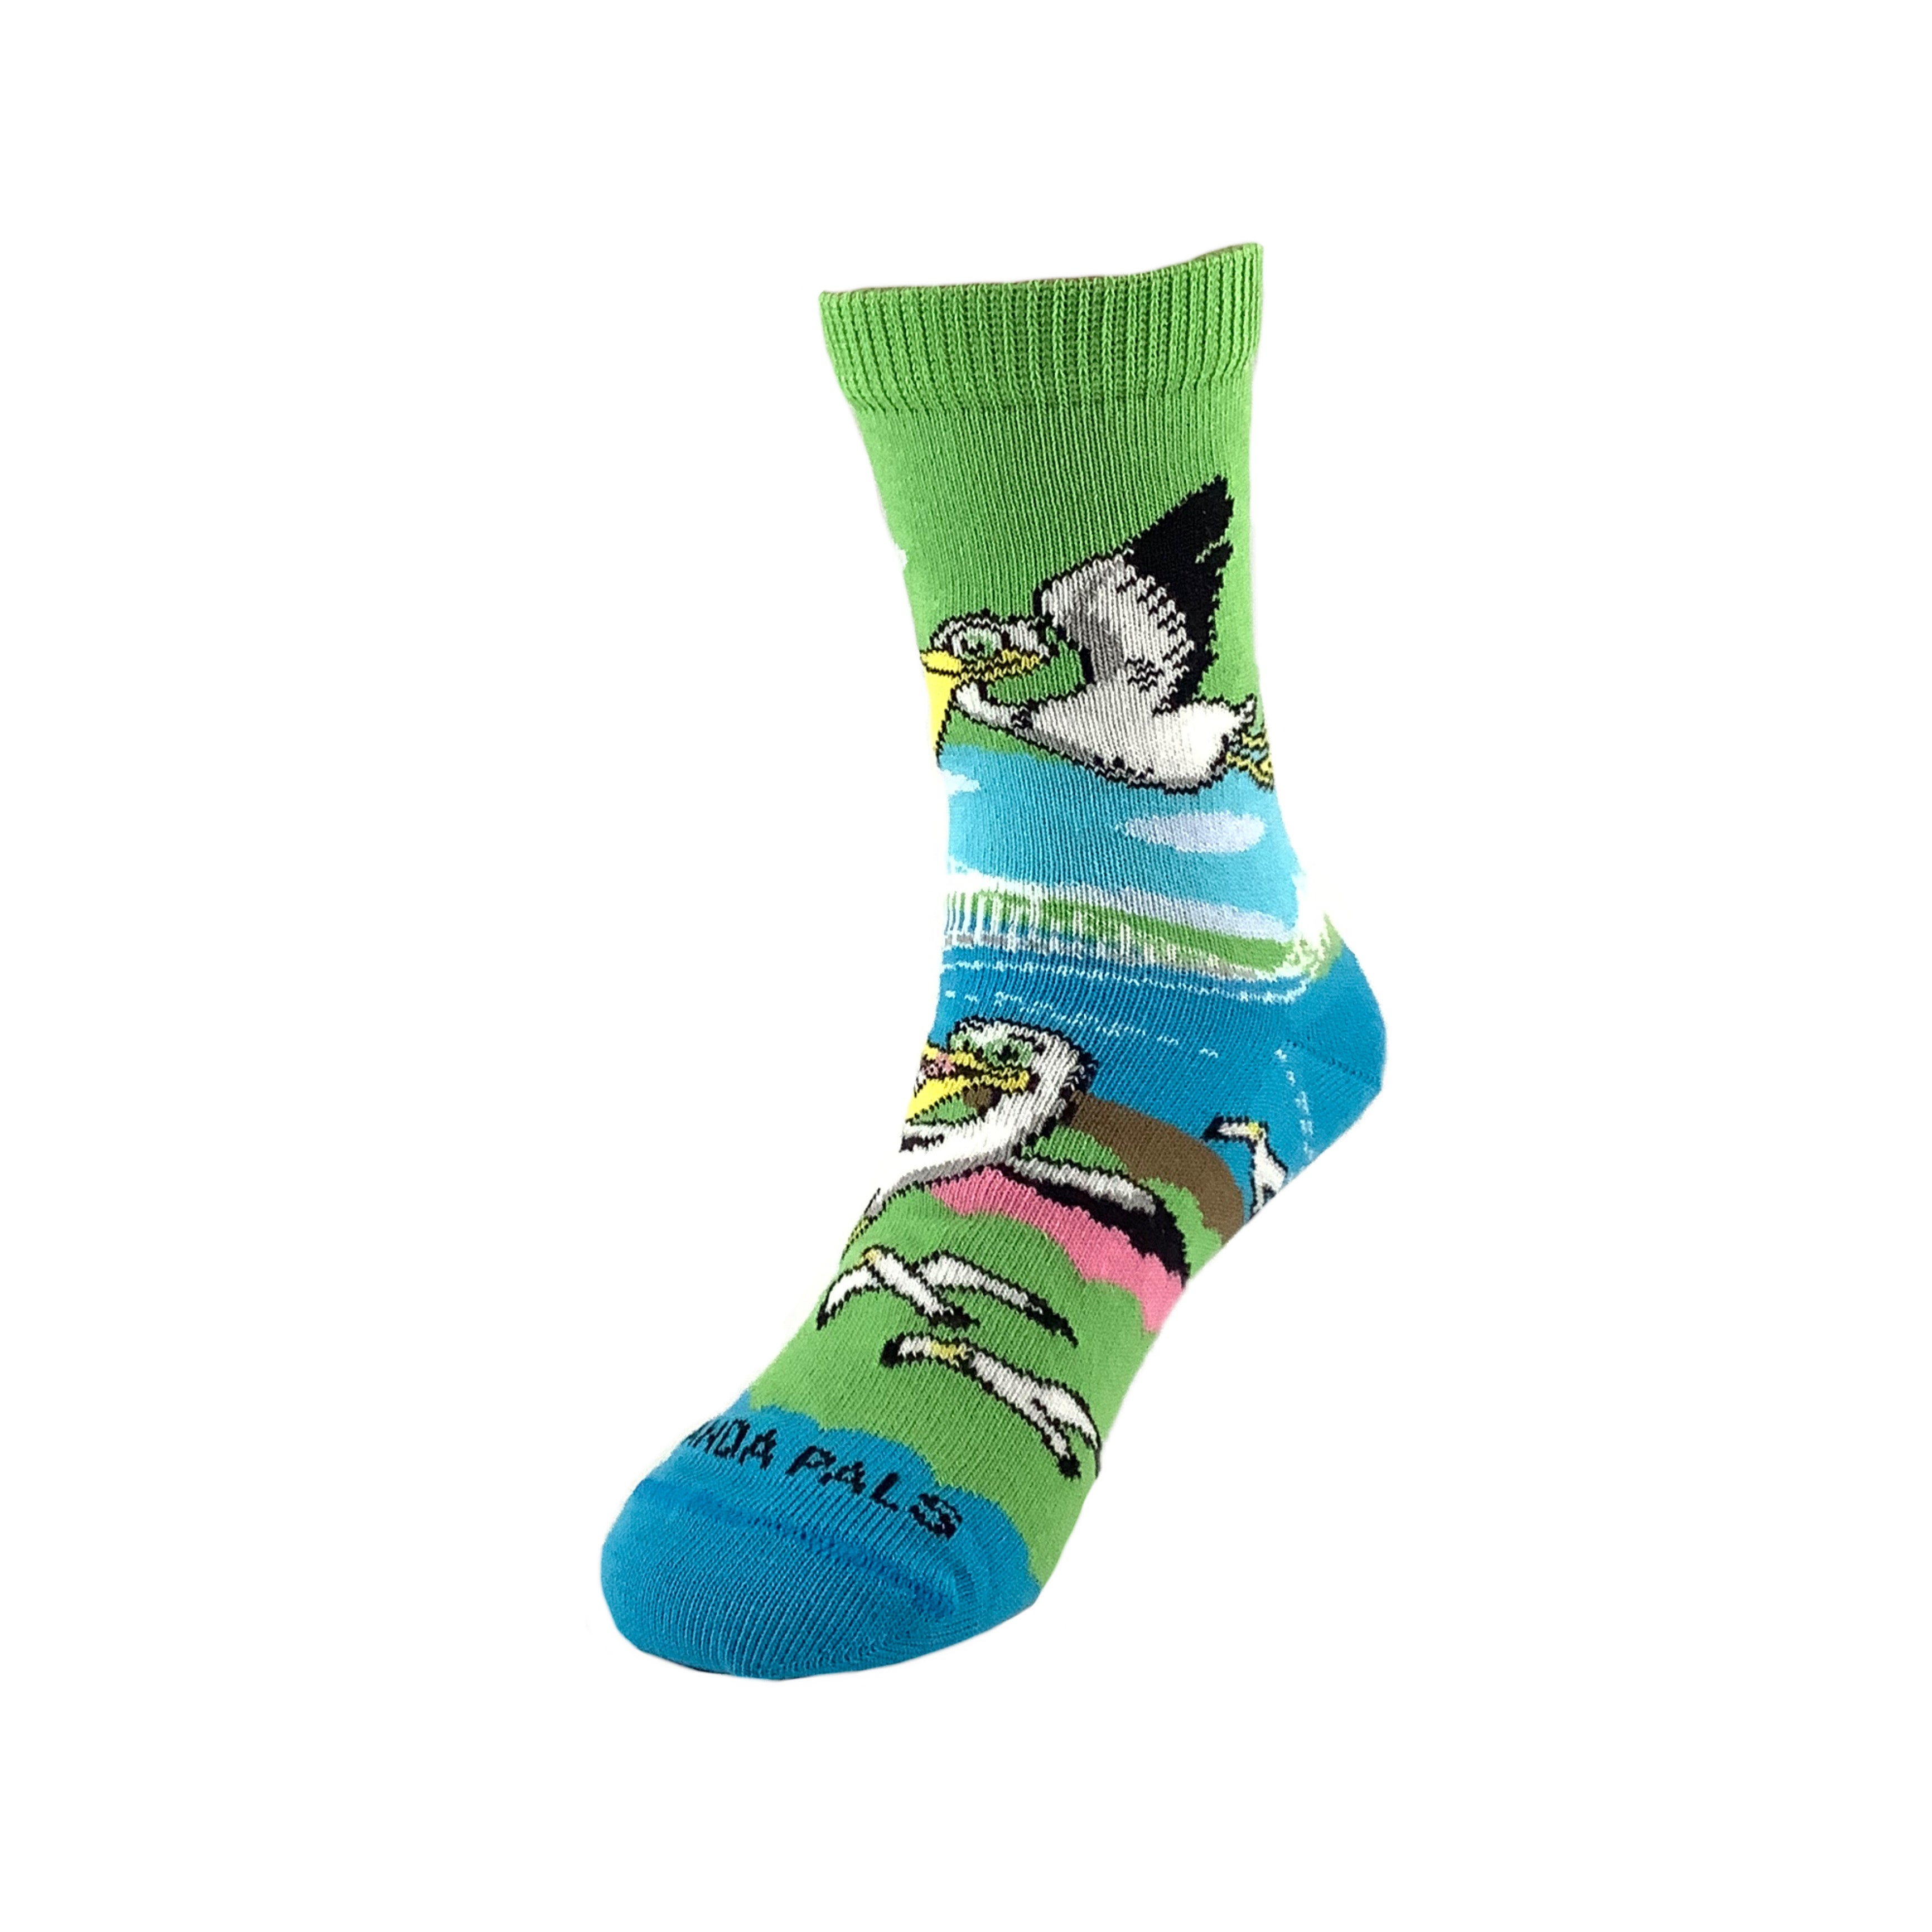 Pelican Flying Over The Bridge Sock (Ages 3-7) from the Sock Panda